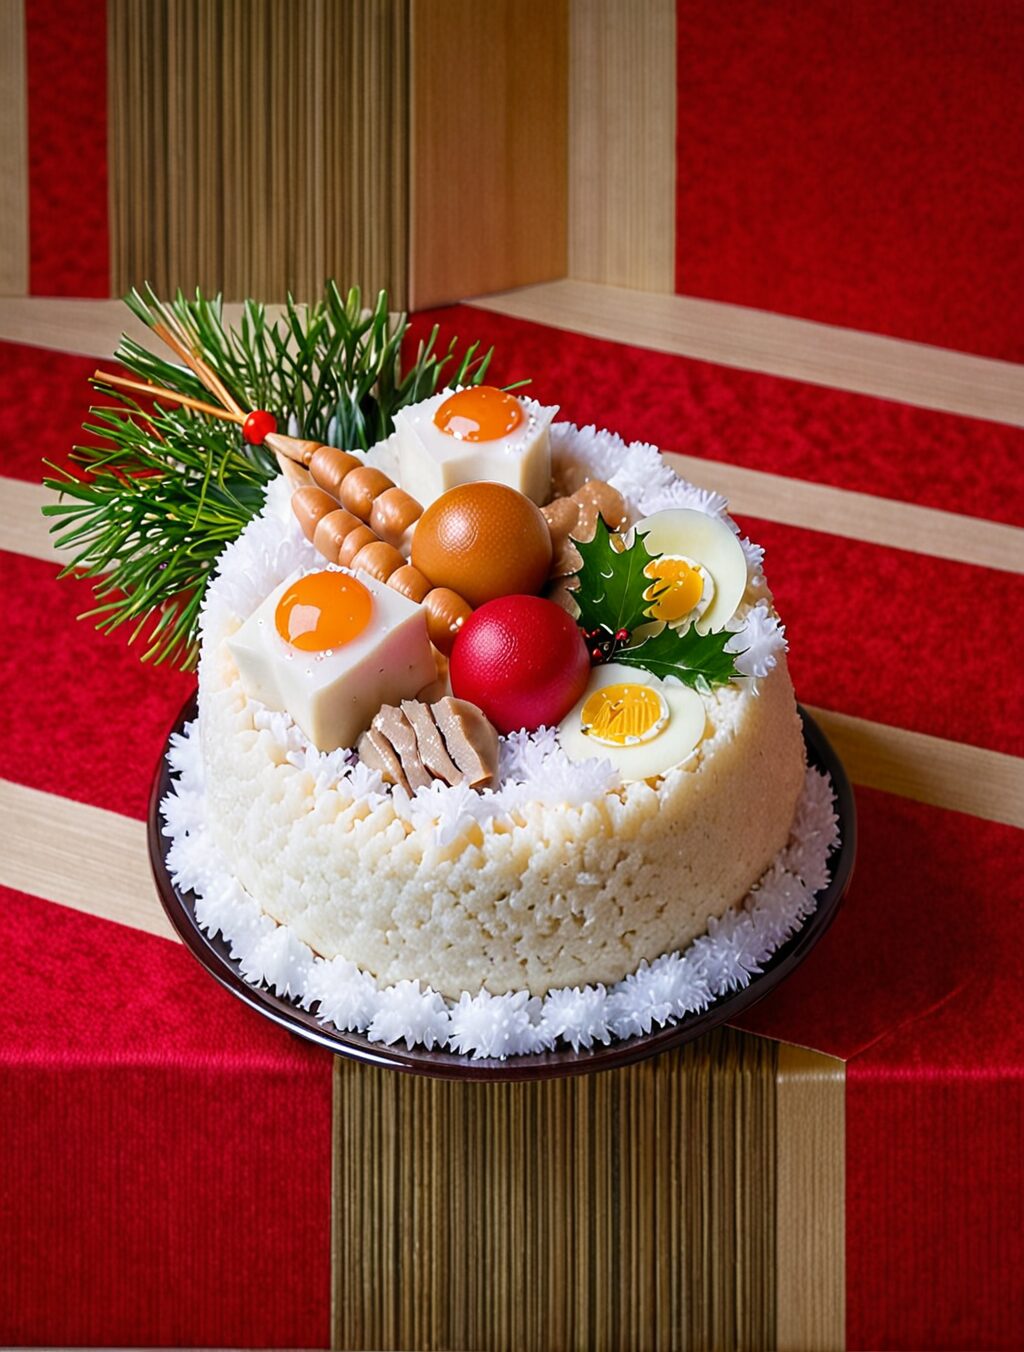 what do you eat at christmas in japan